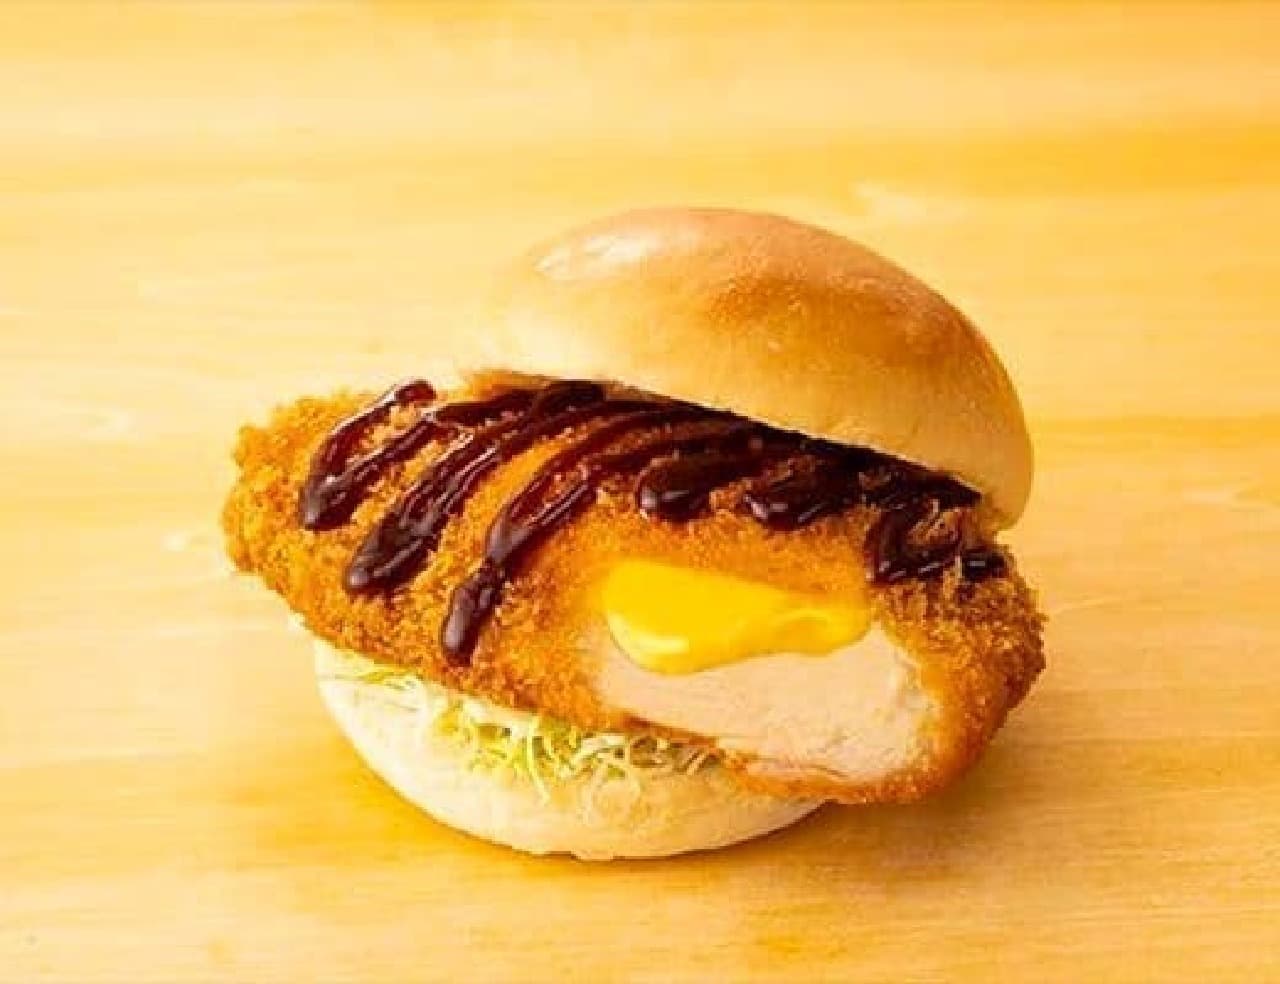 Lawson "Burger cheese chicken cutlet that sticks out"